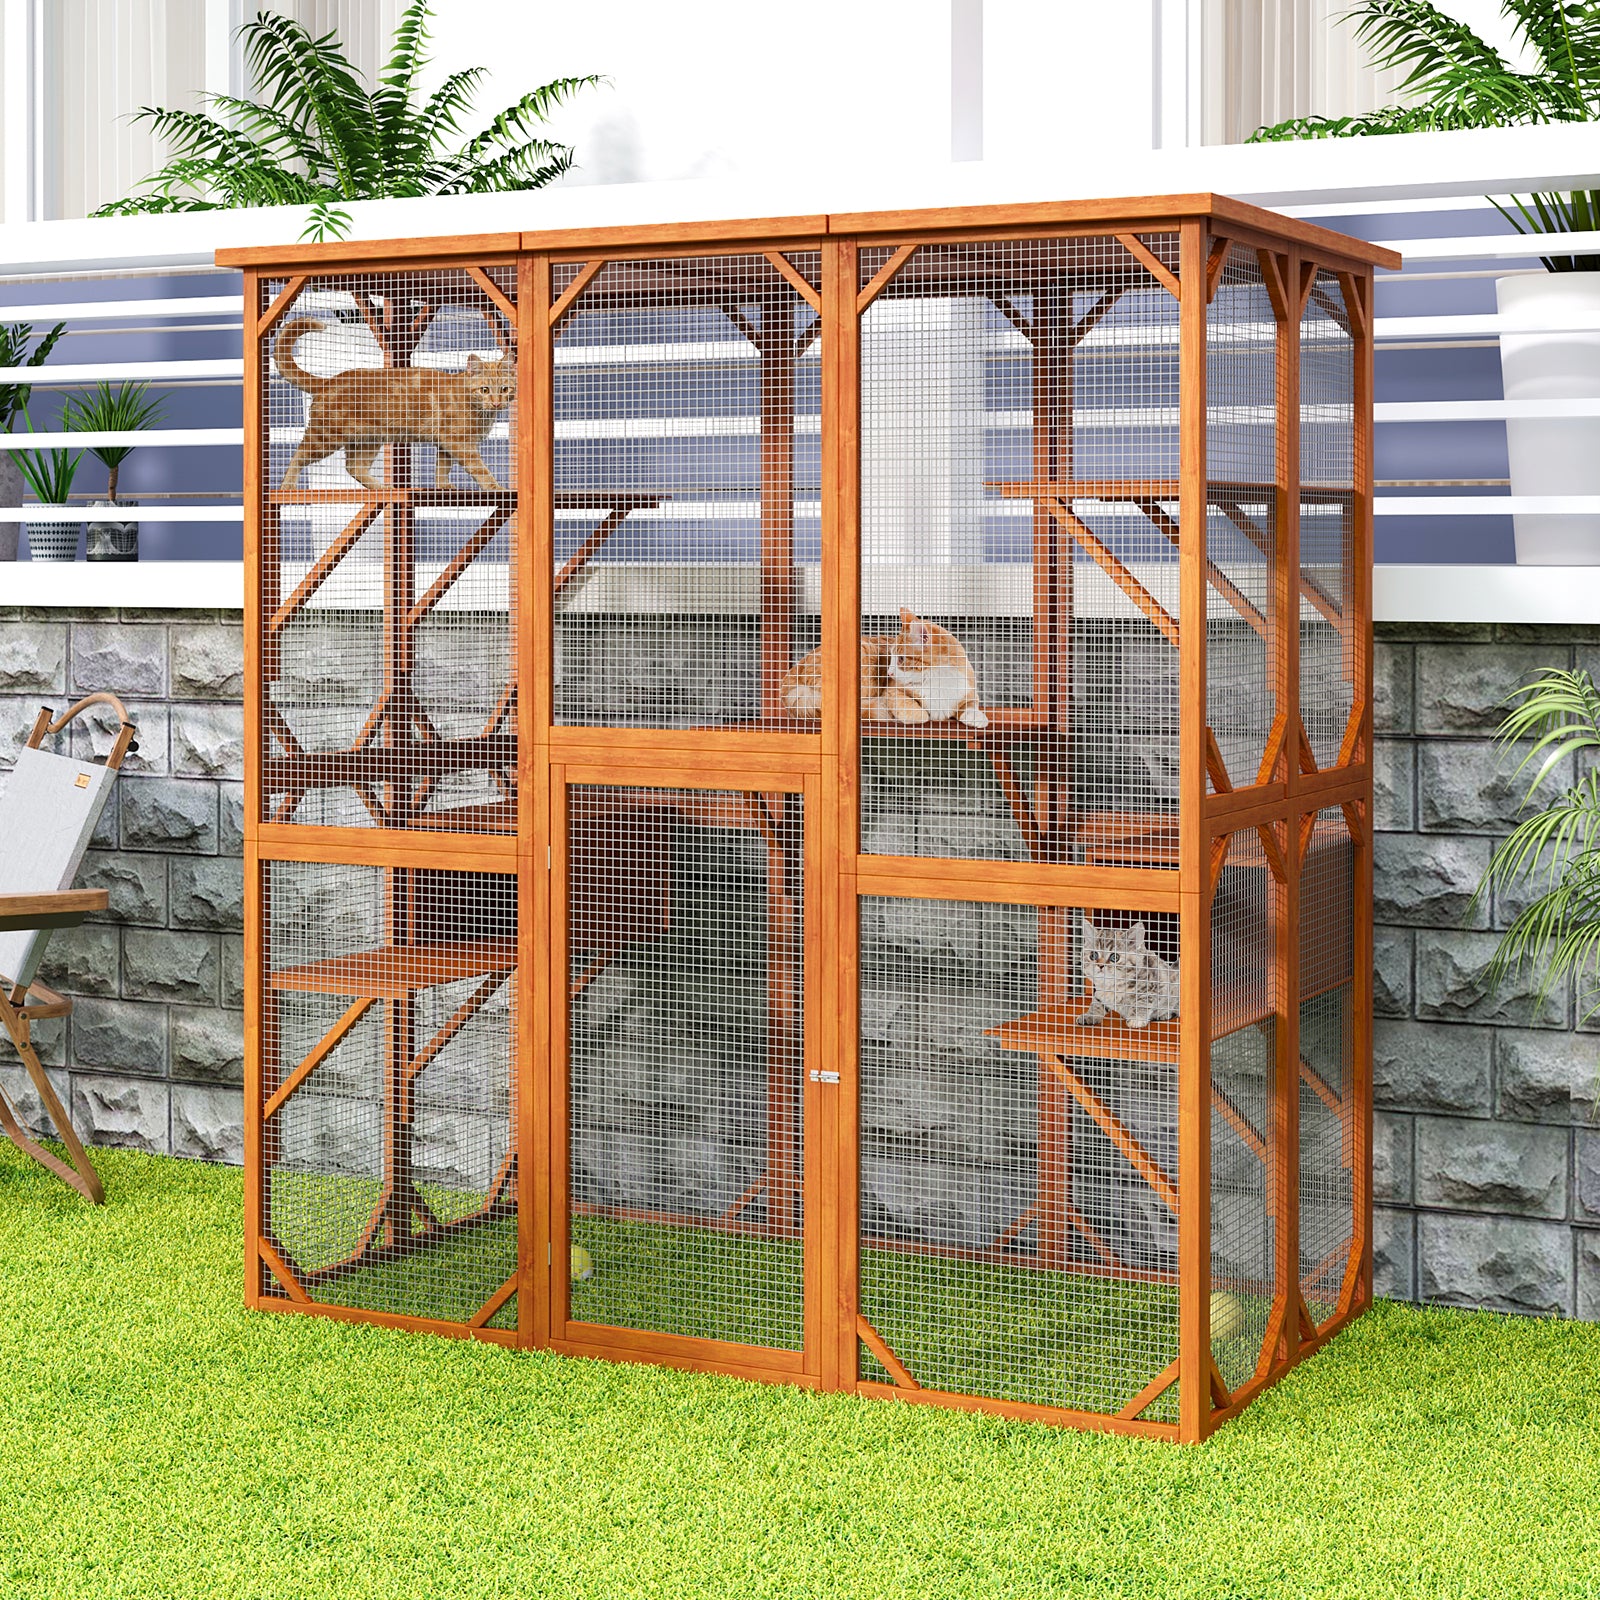 Large Outdoor Cat House Outdoor Catio Kitty Shelter